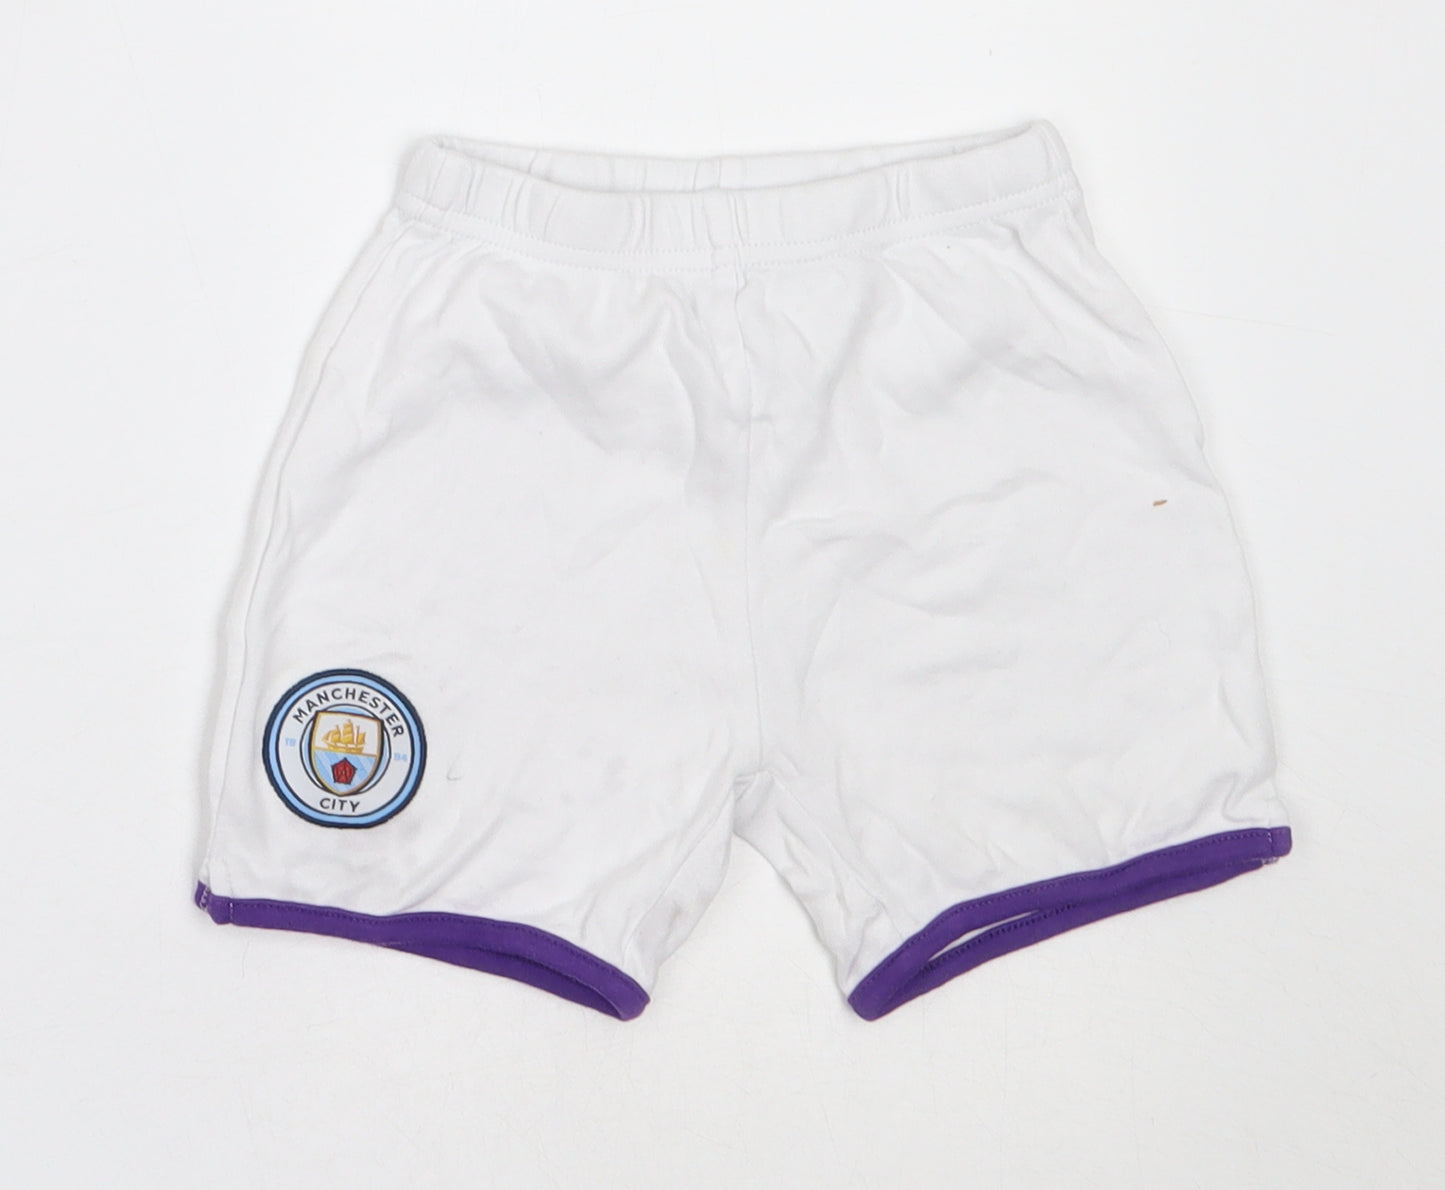 Manchester City FC Boys White  Cotton Cropped Trousers Size 18-24 Months   - Manchester City Football Club